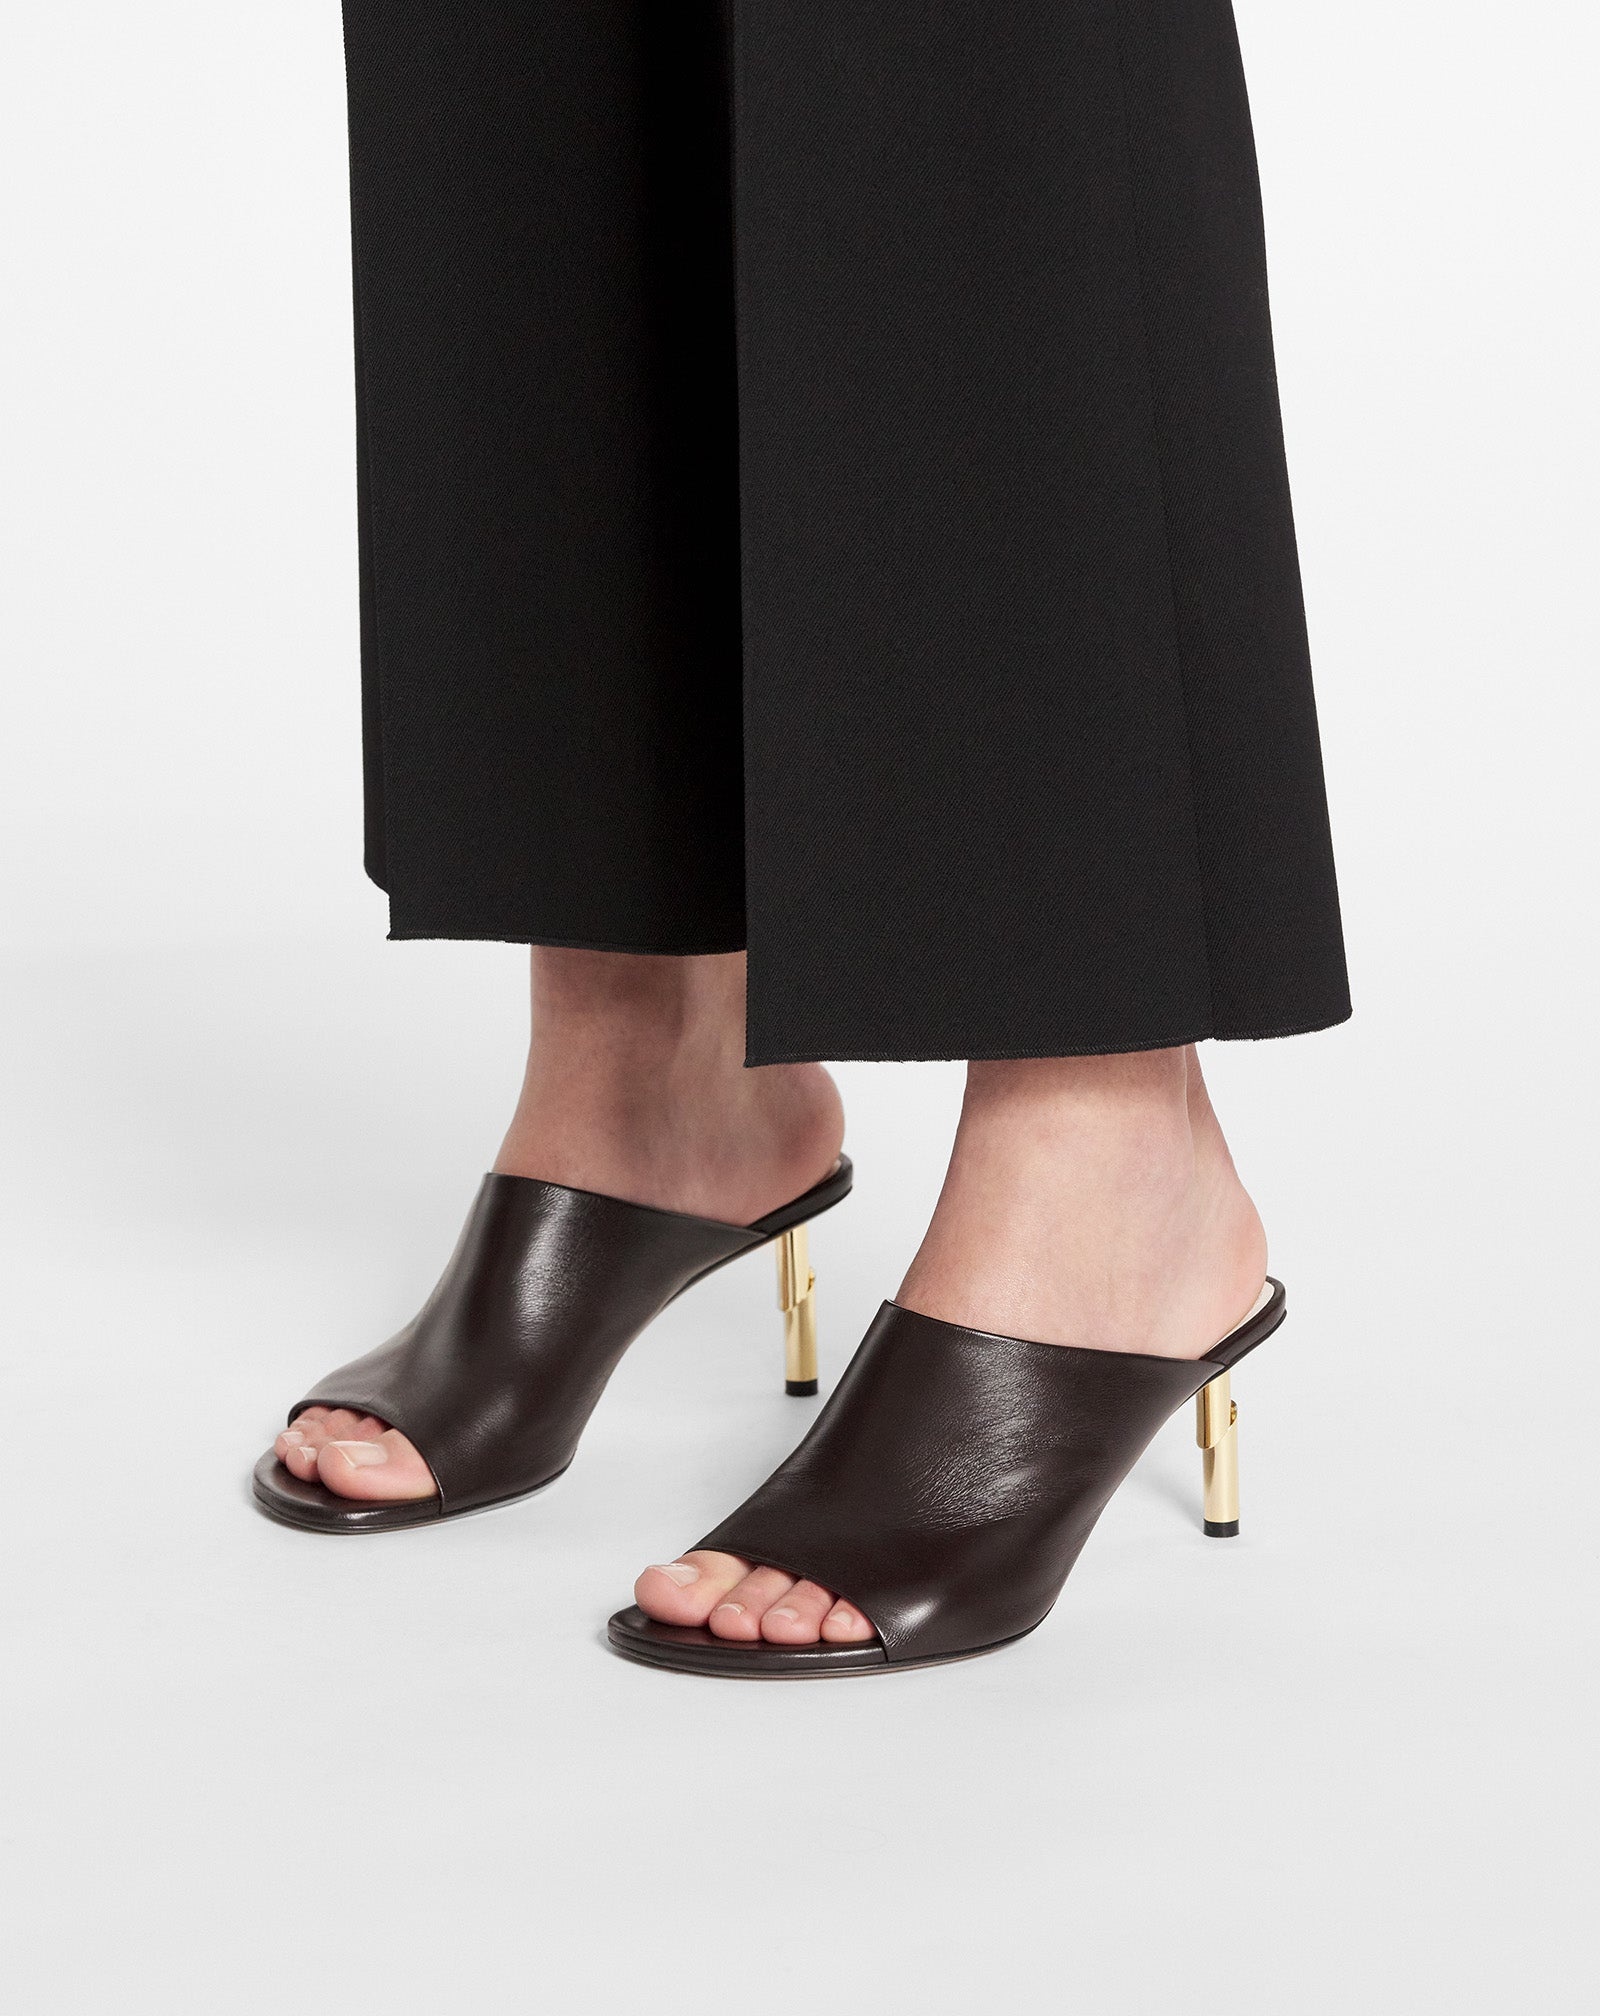 LEATHER SEQUENCE BY LANVIN MULES - 3